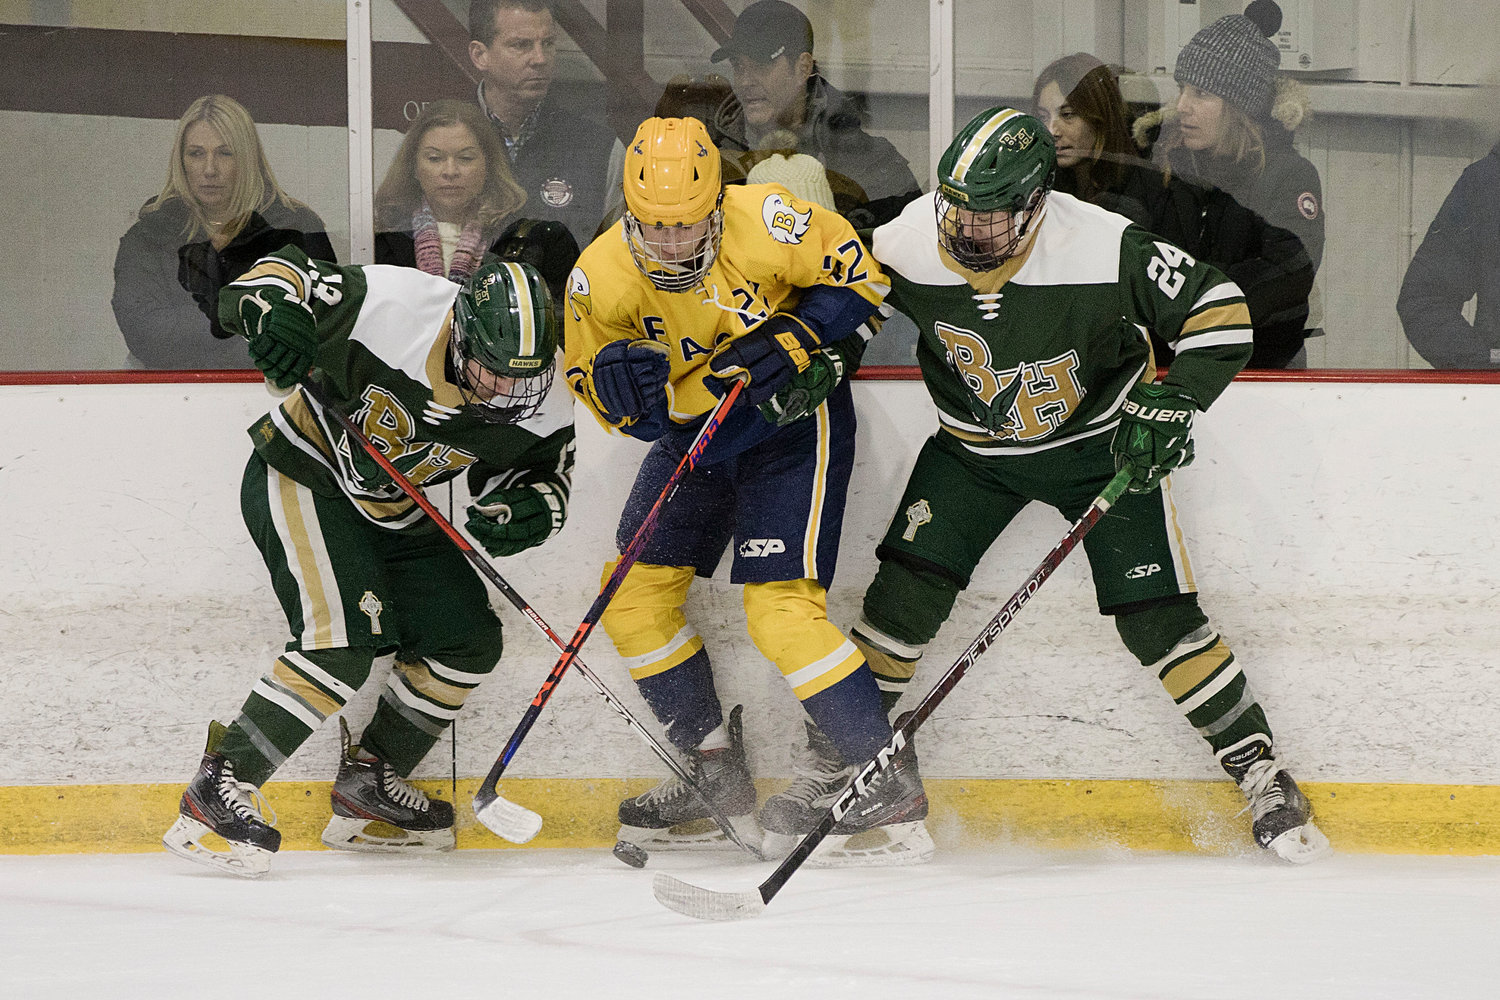 Trevor Snow is sandwiched between a pair of Hendricken opponents while vying for a loose puck.